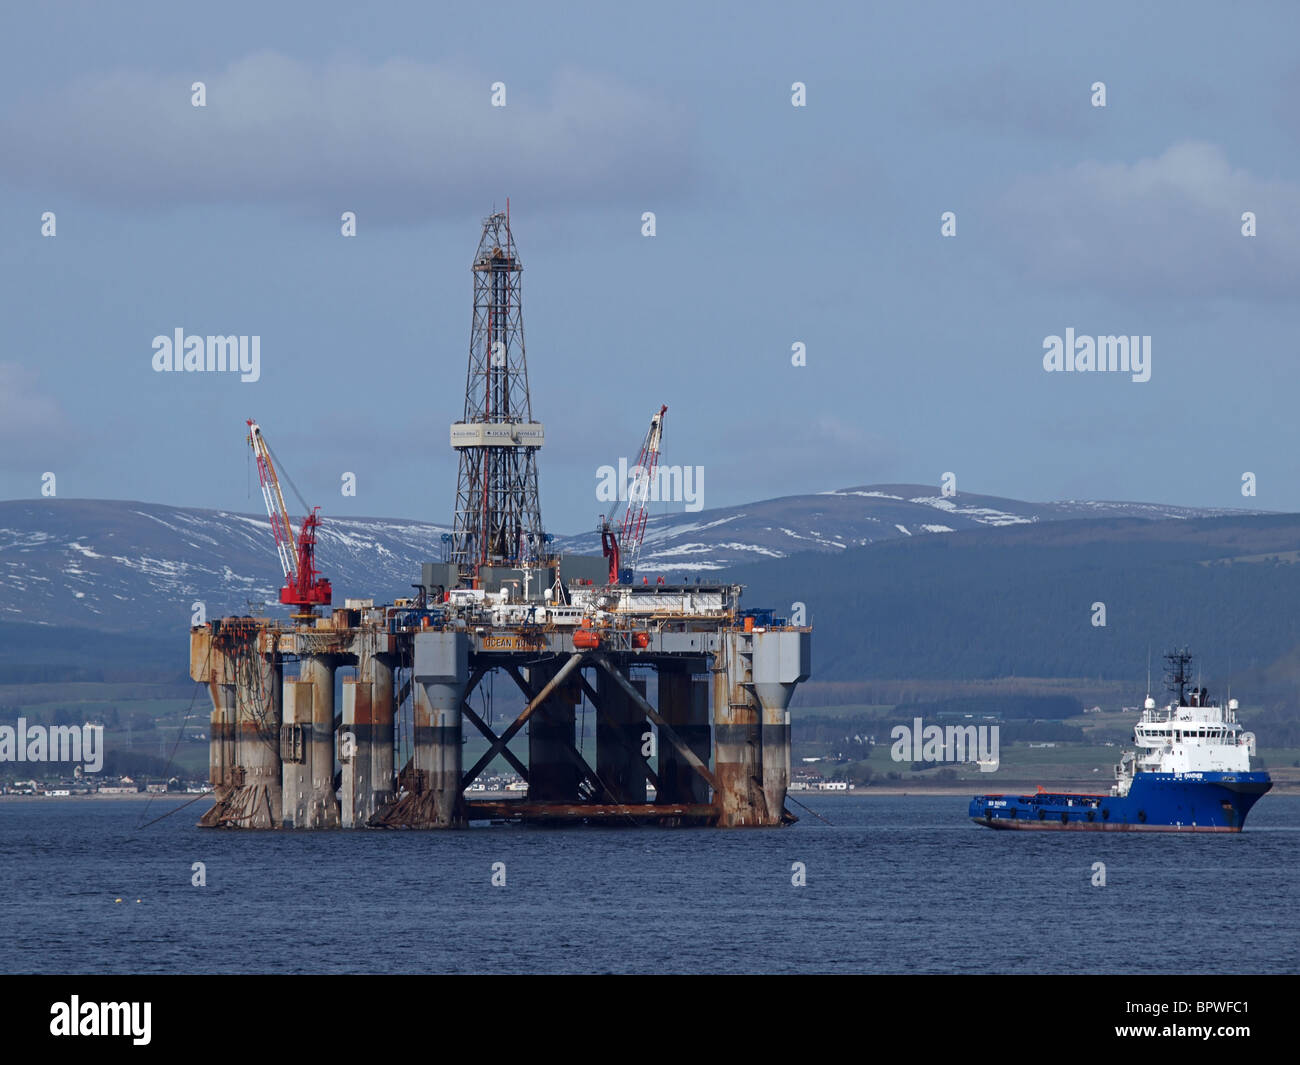 The anchors of the semi-sub oil rig Ocean Nomad are lifted by the anchor handling vessel Sea Panther, Cromarty Firth, Scotland. Stock Photo